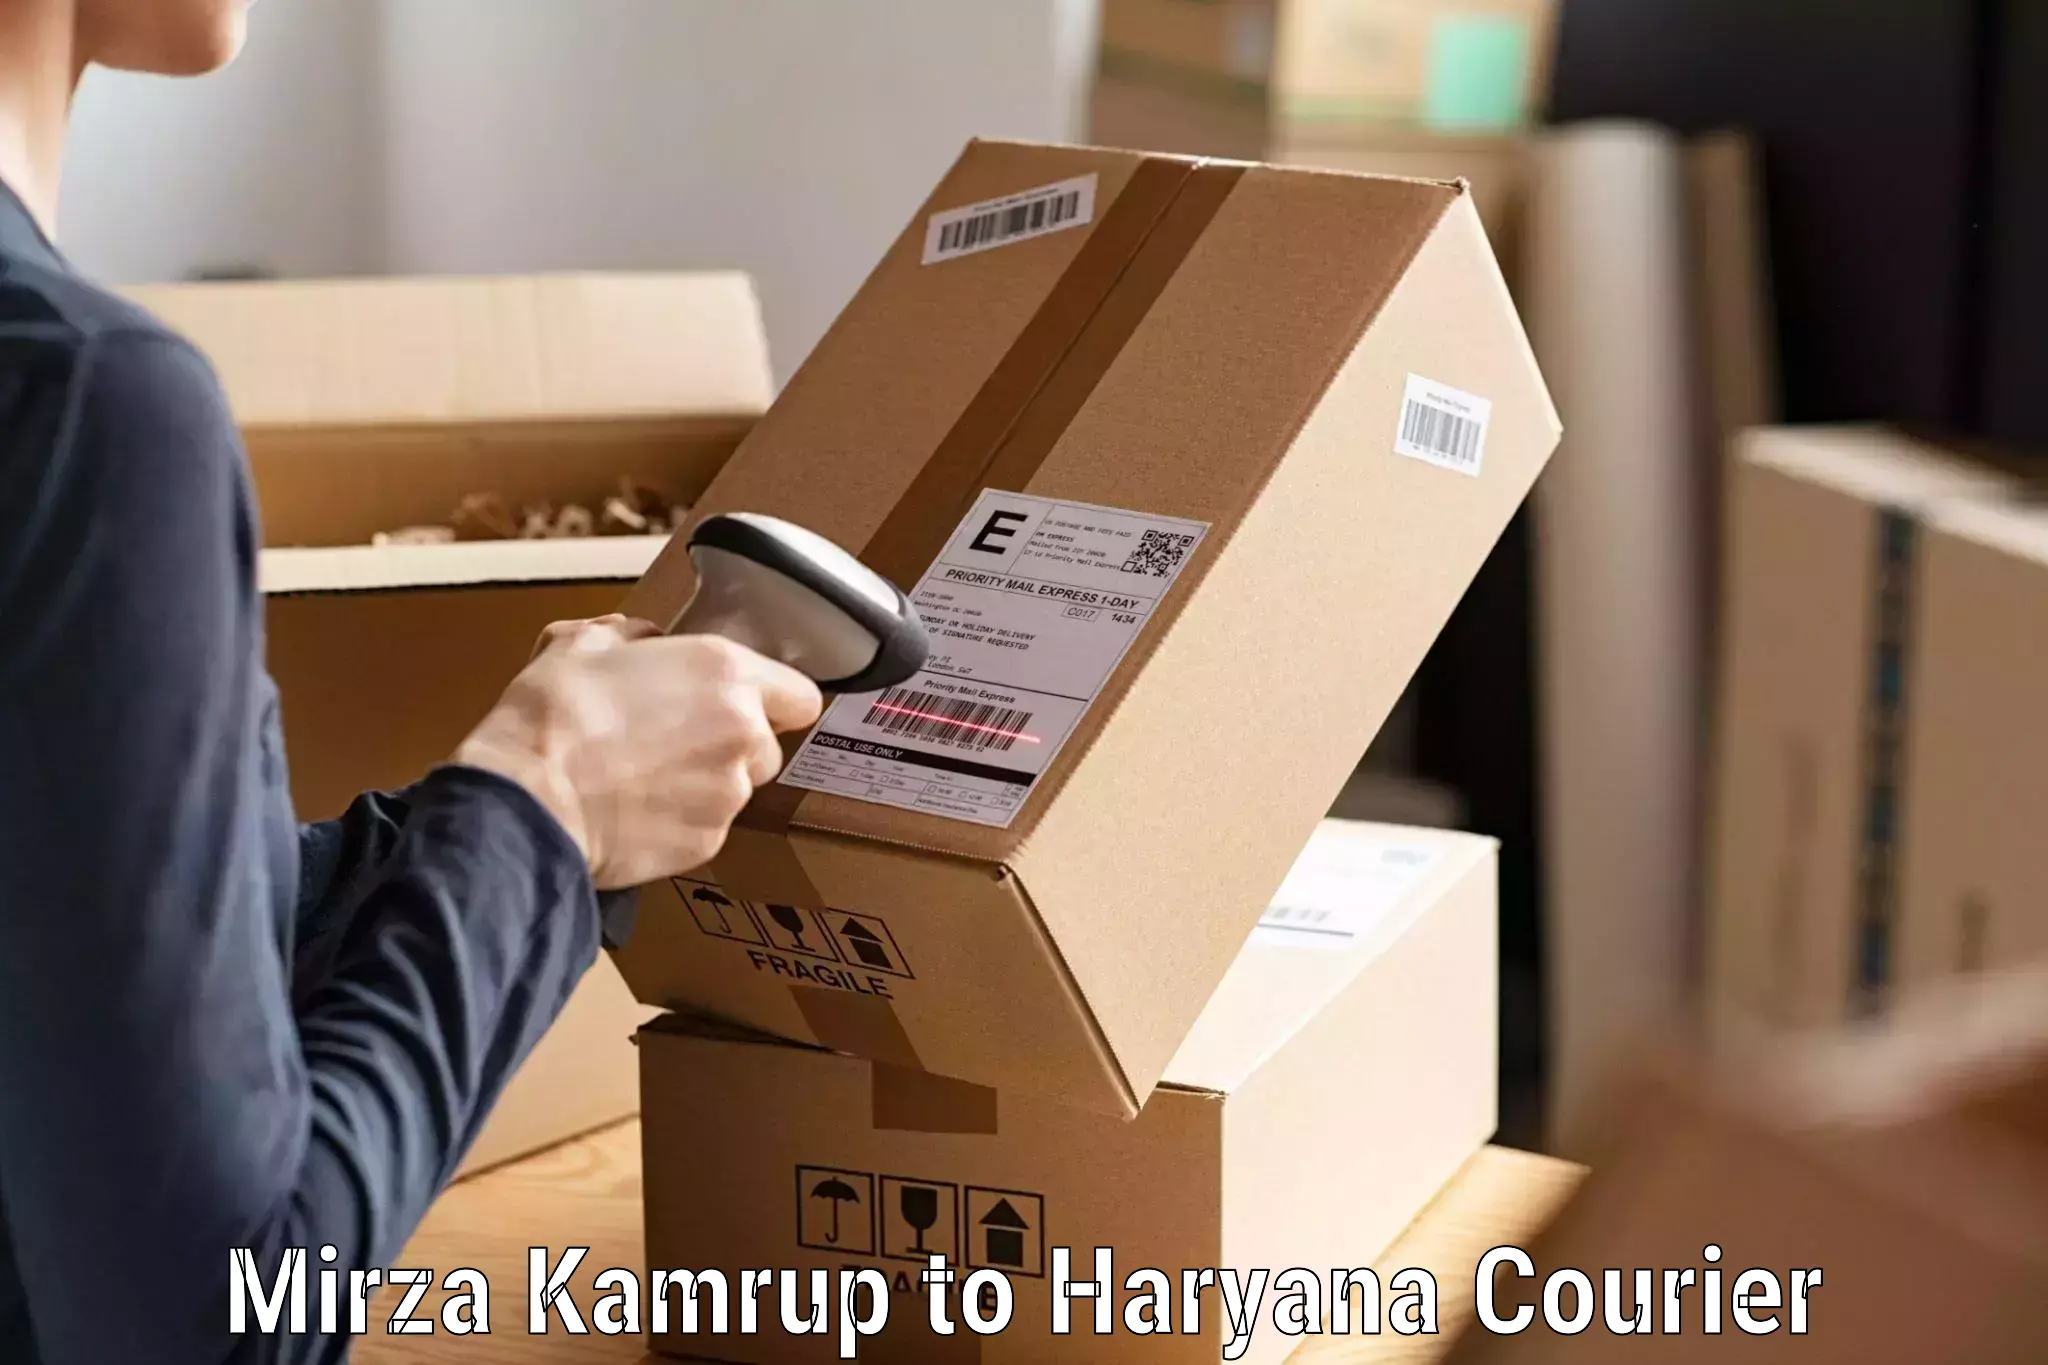 State-of-the-art courier technology Mirza Kamrup to Panipat